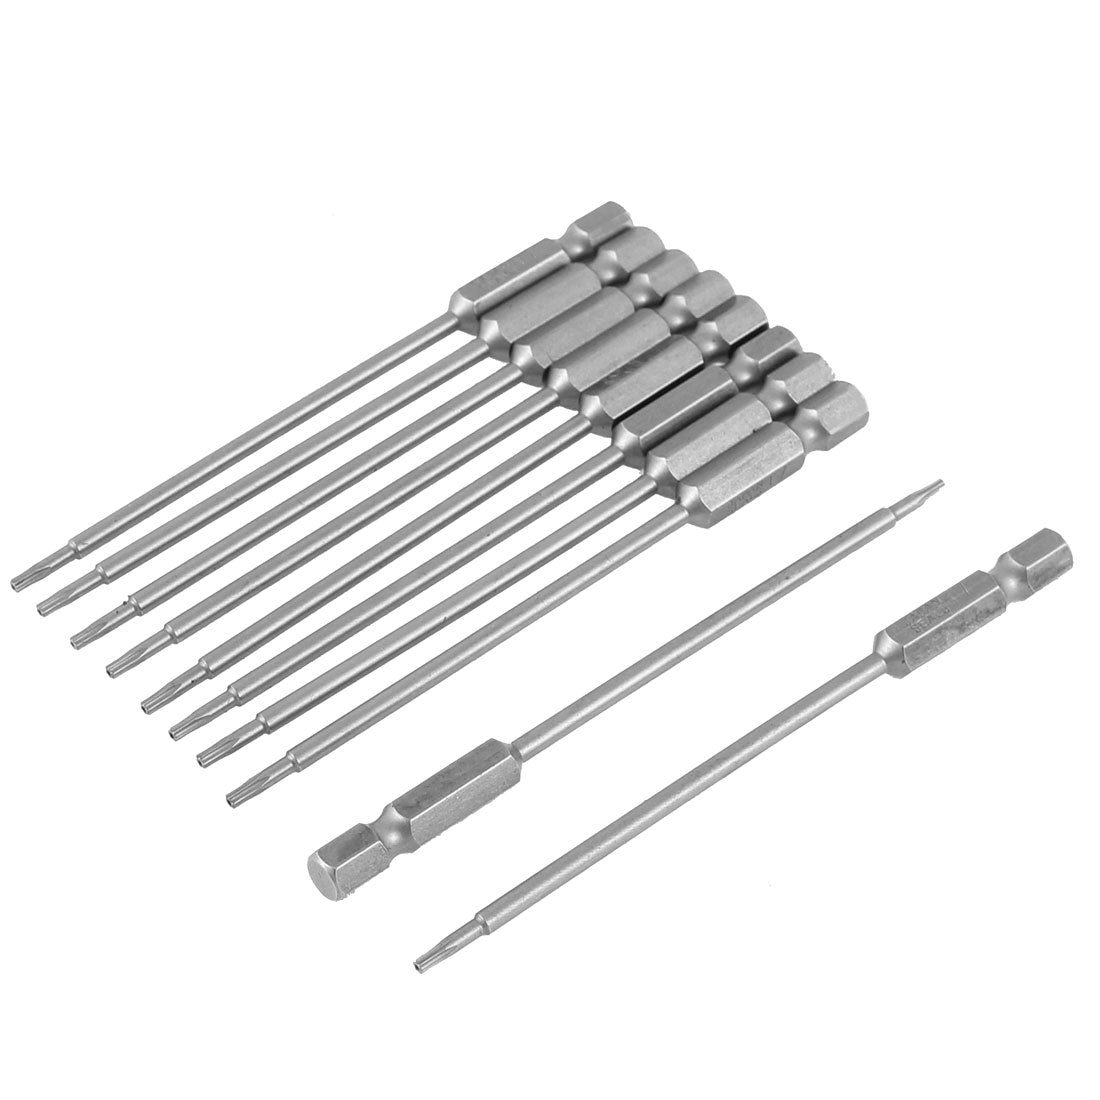 uxcell Uxcell 10pcs 100mm T7 Magnetic Torx Security Screwdriver Bits Repair Tool